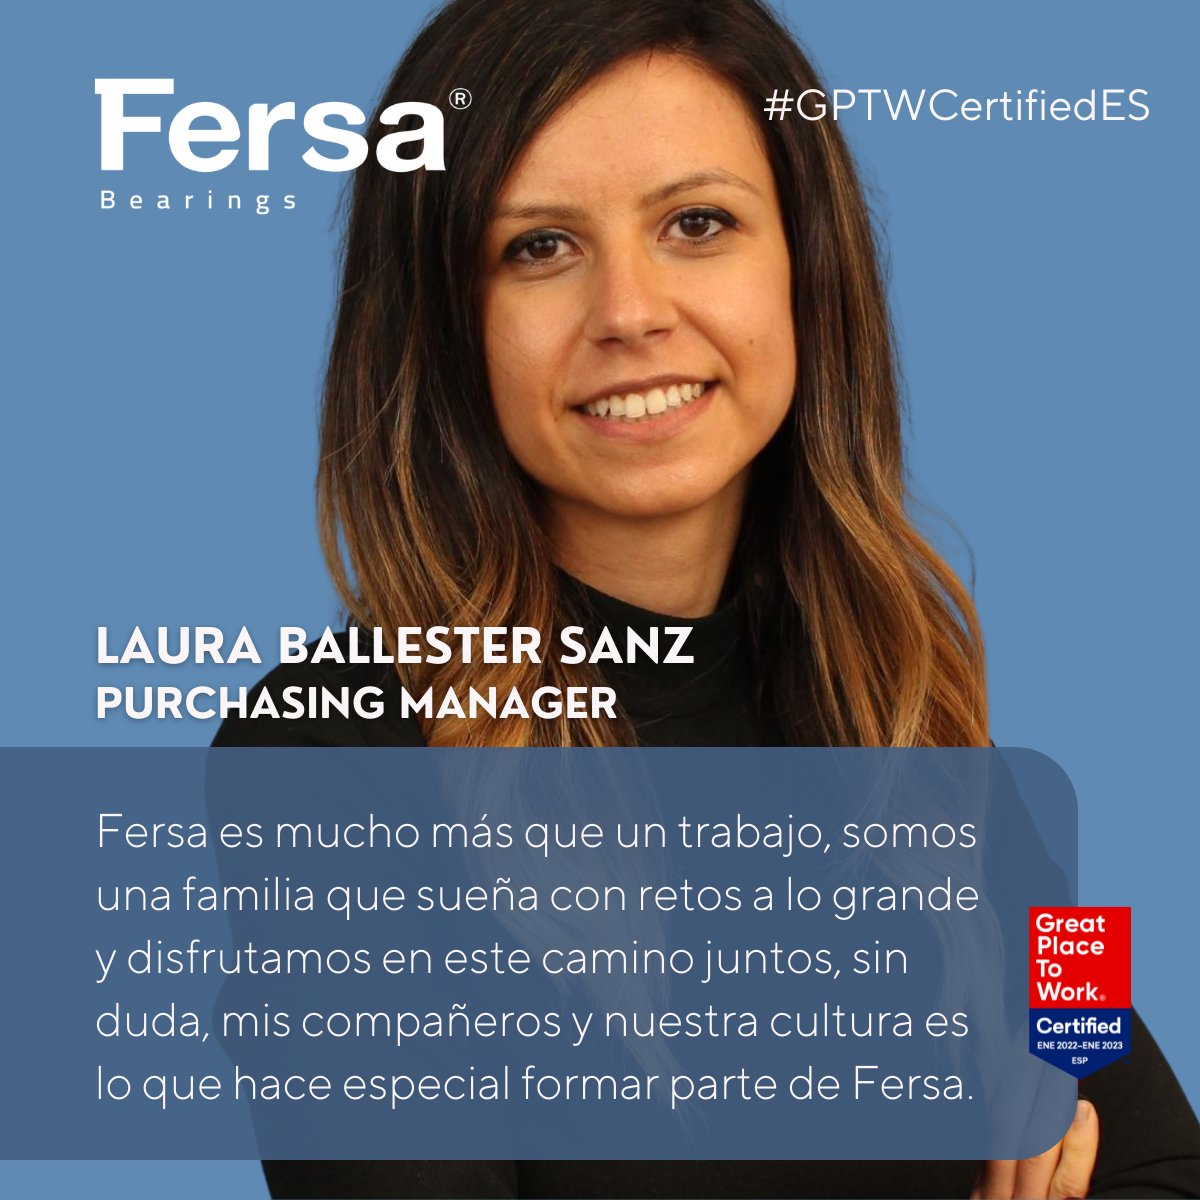 '#FERSA is much more than a job, we are a family that dreams of big #challenges and we enjoy this journey together. Without a doubt, the team and culture are what makes being part of #FERSA special.' 💙

#GPTWCertifiedES #FERSAStyle #InnovativeSpirit